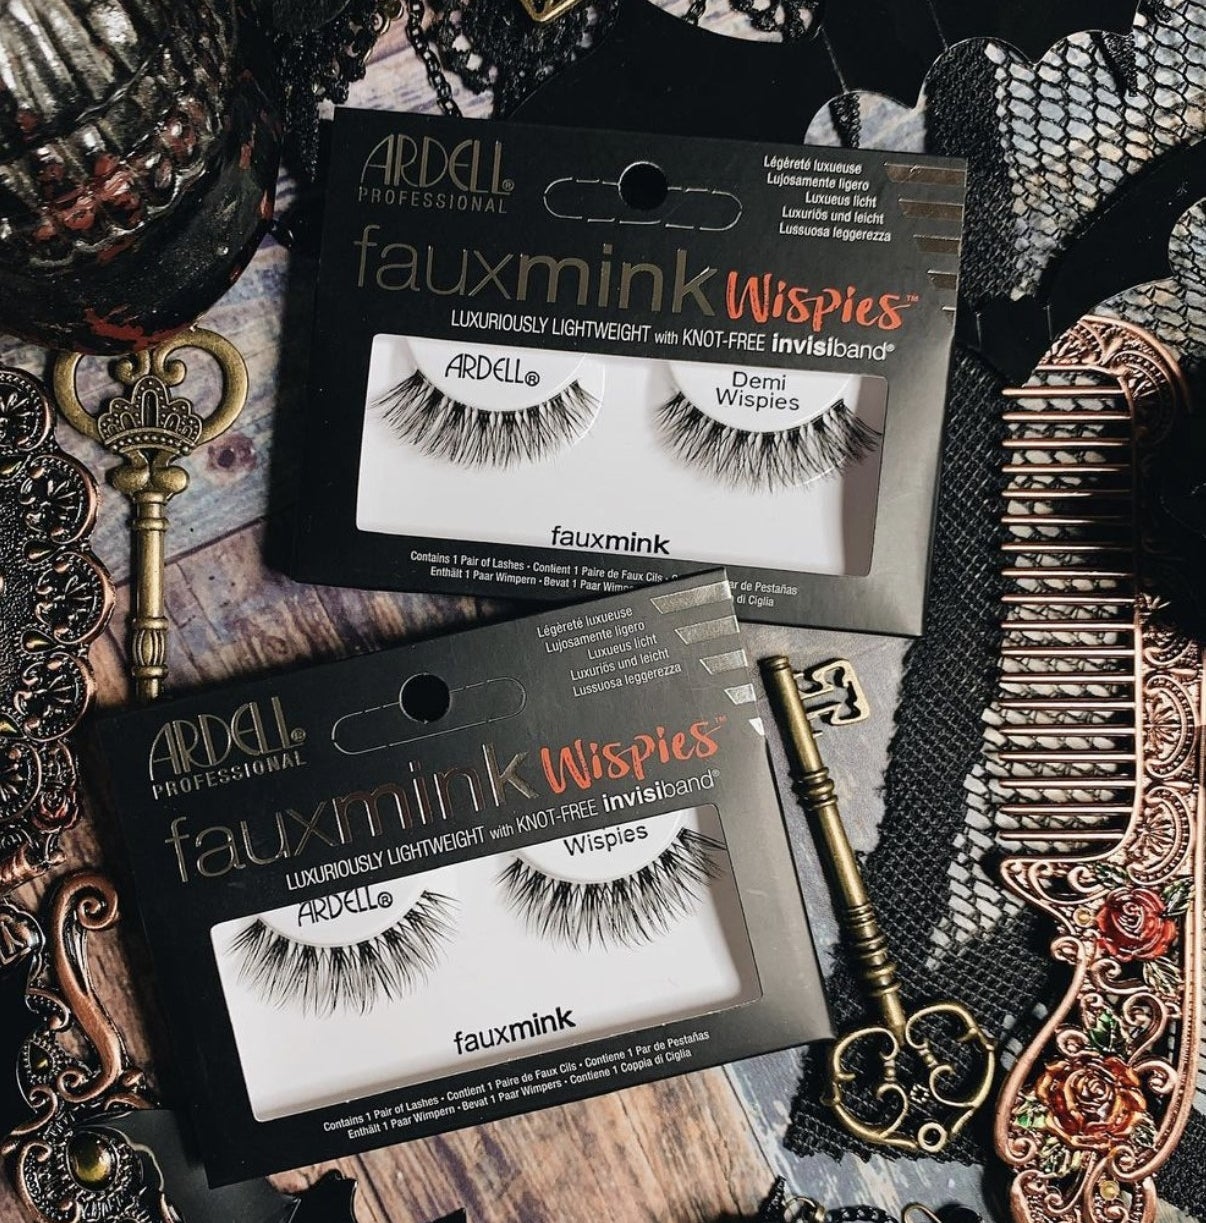 Ardell Professional fauxmink wispies and demi wispies